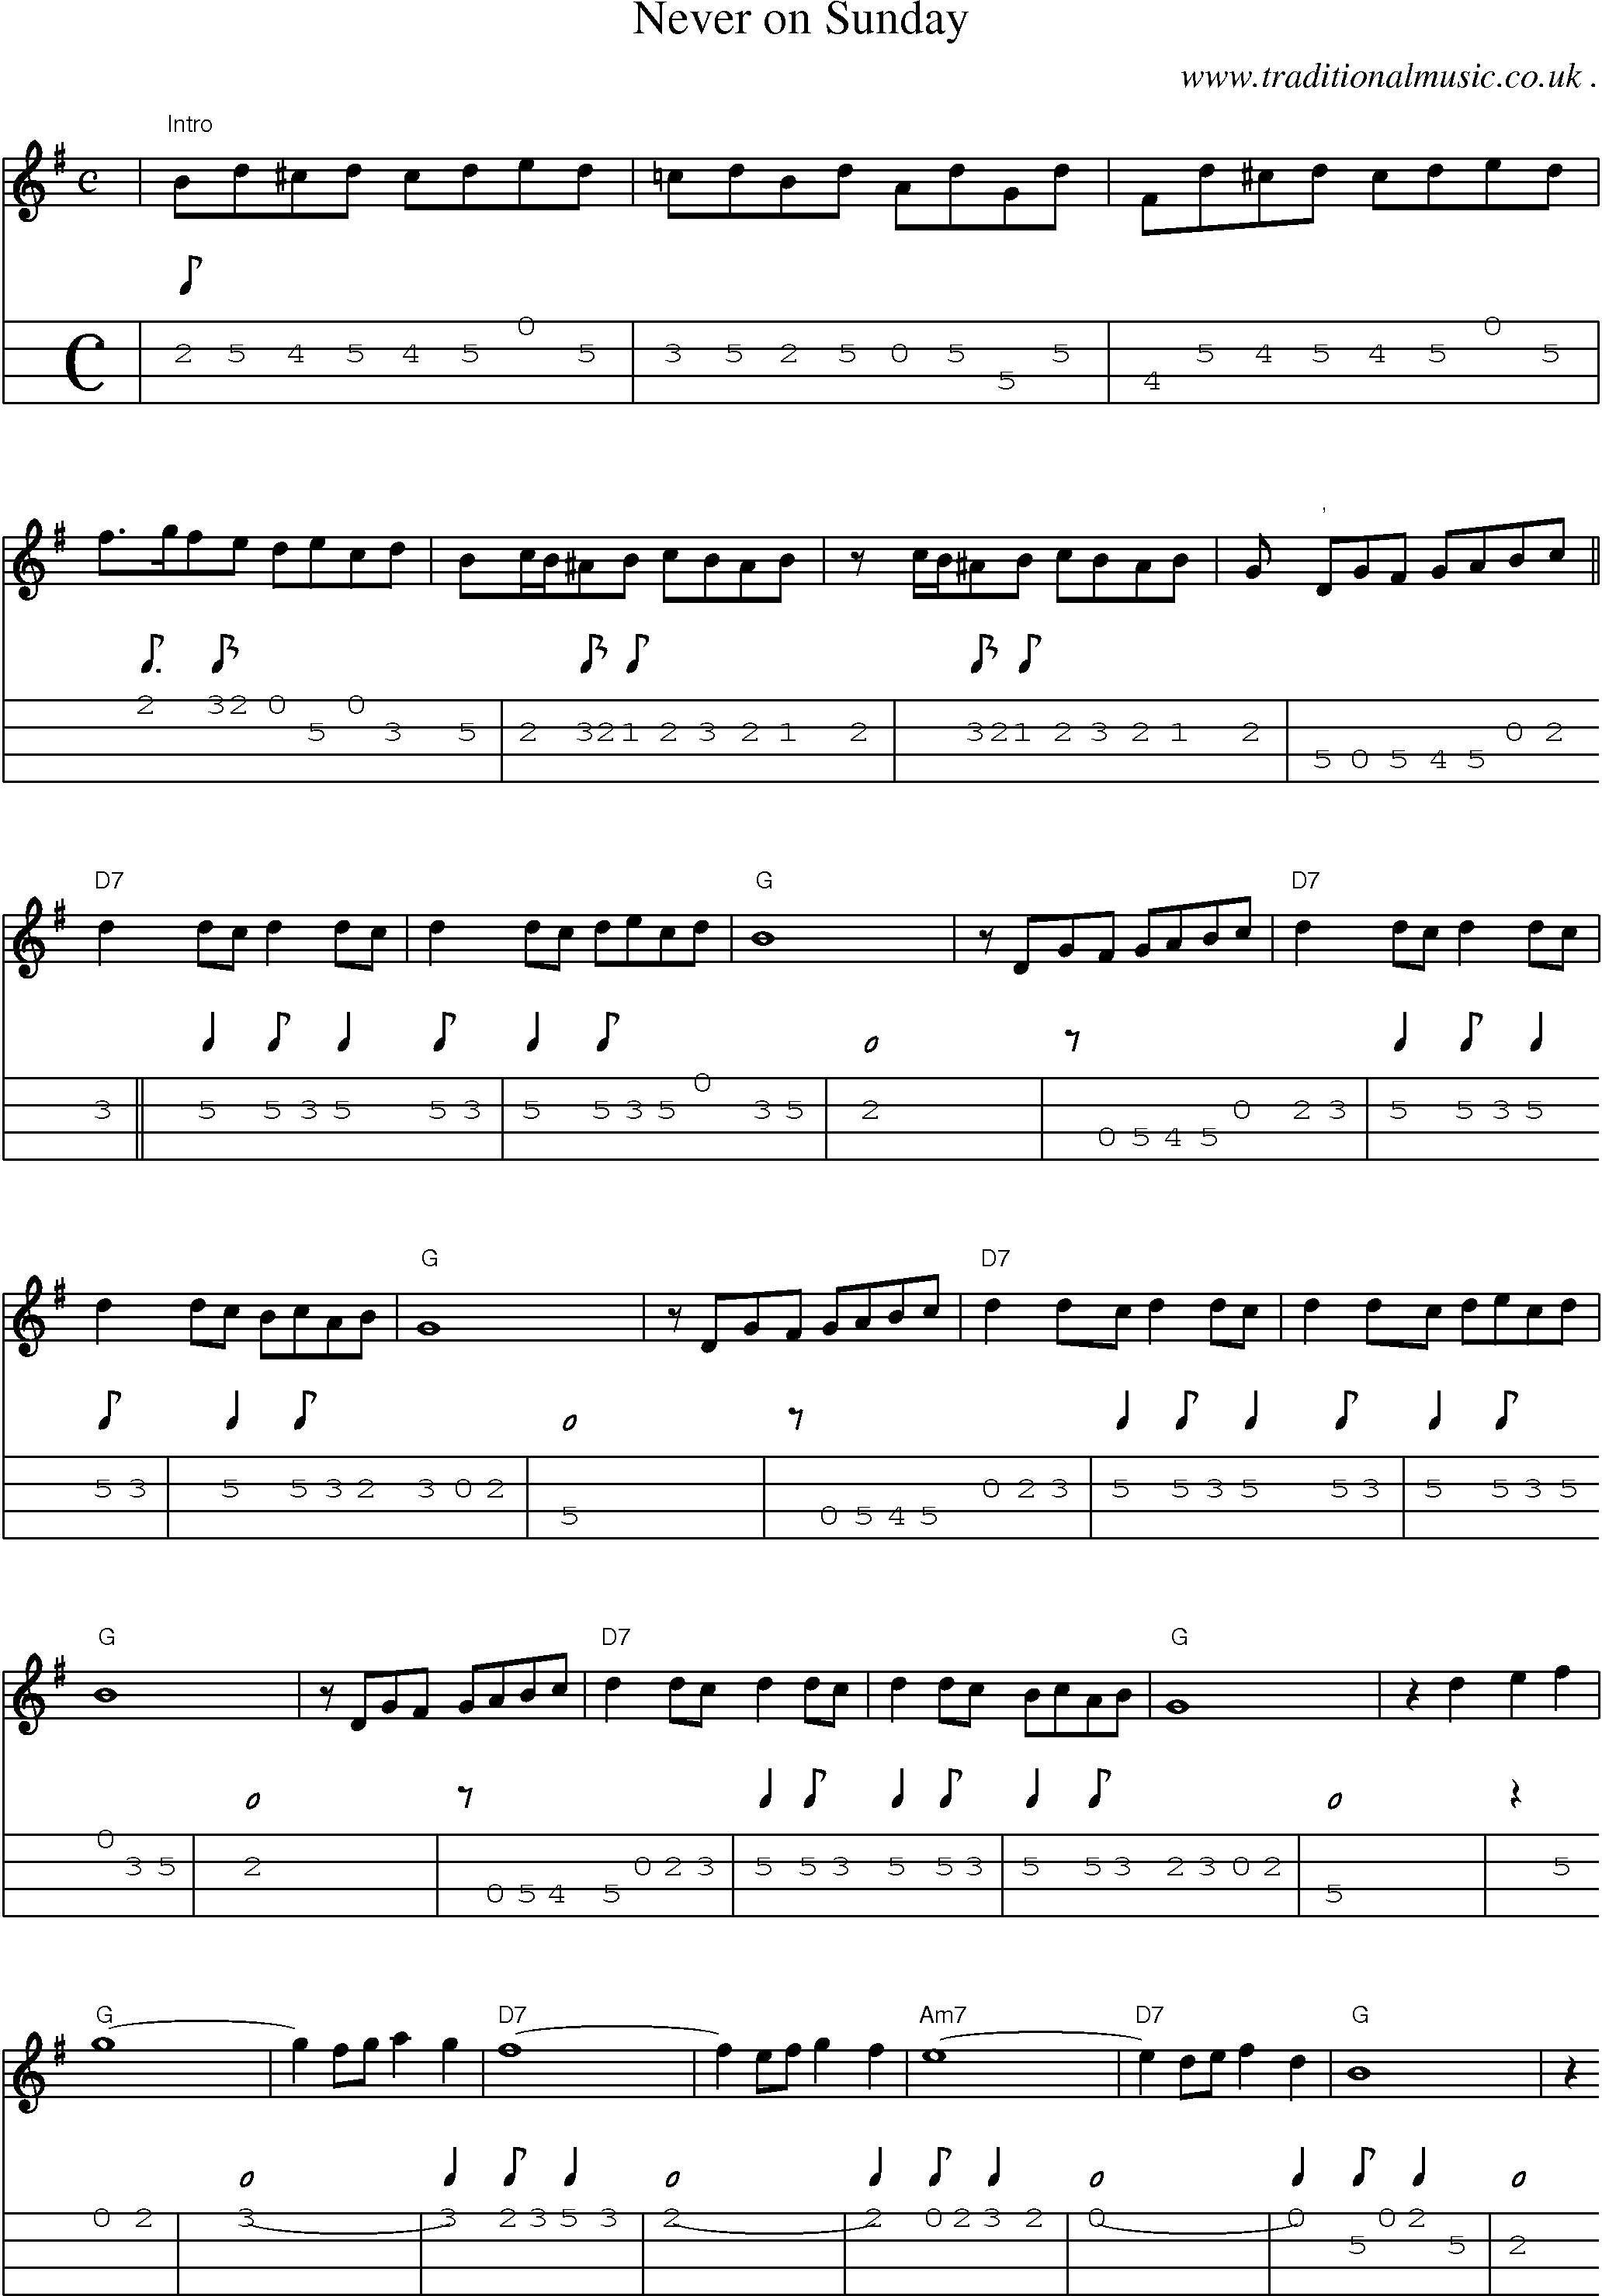 Sheet-music  score, Chords and Mandolin Tabs for Never On Sunday